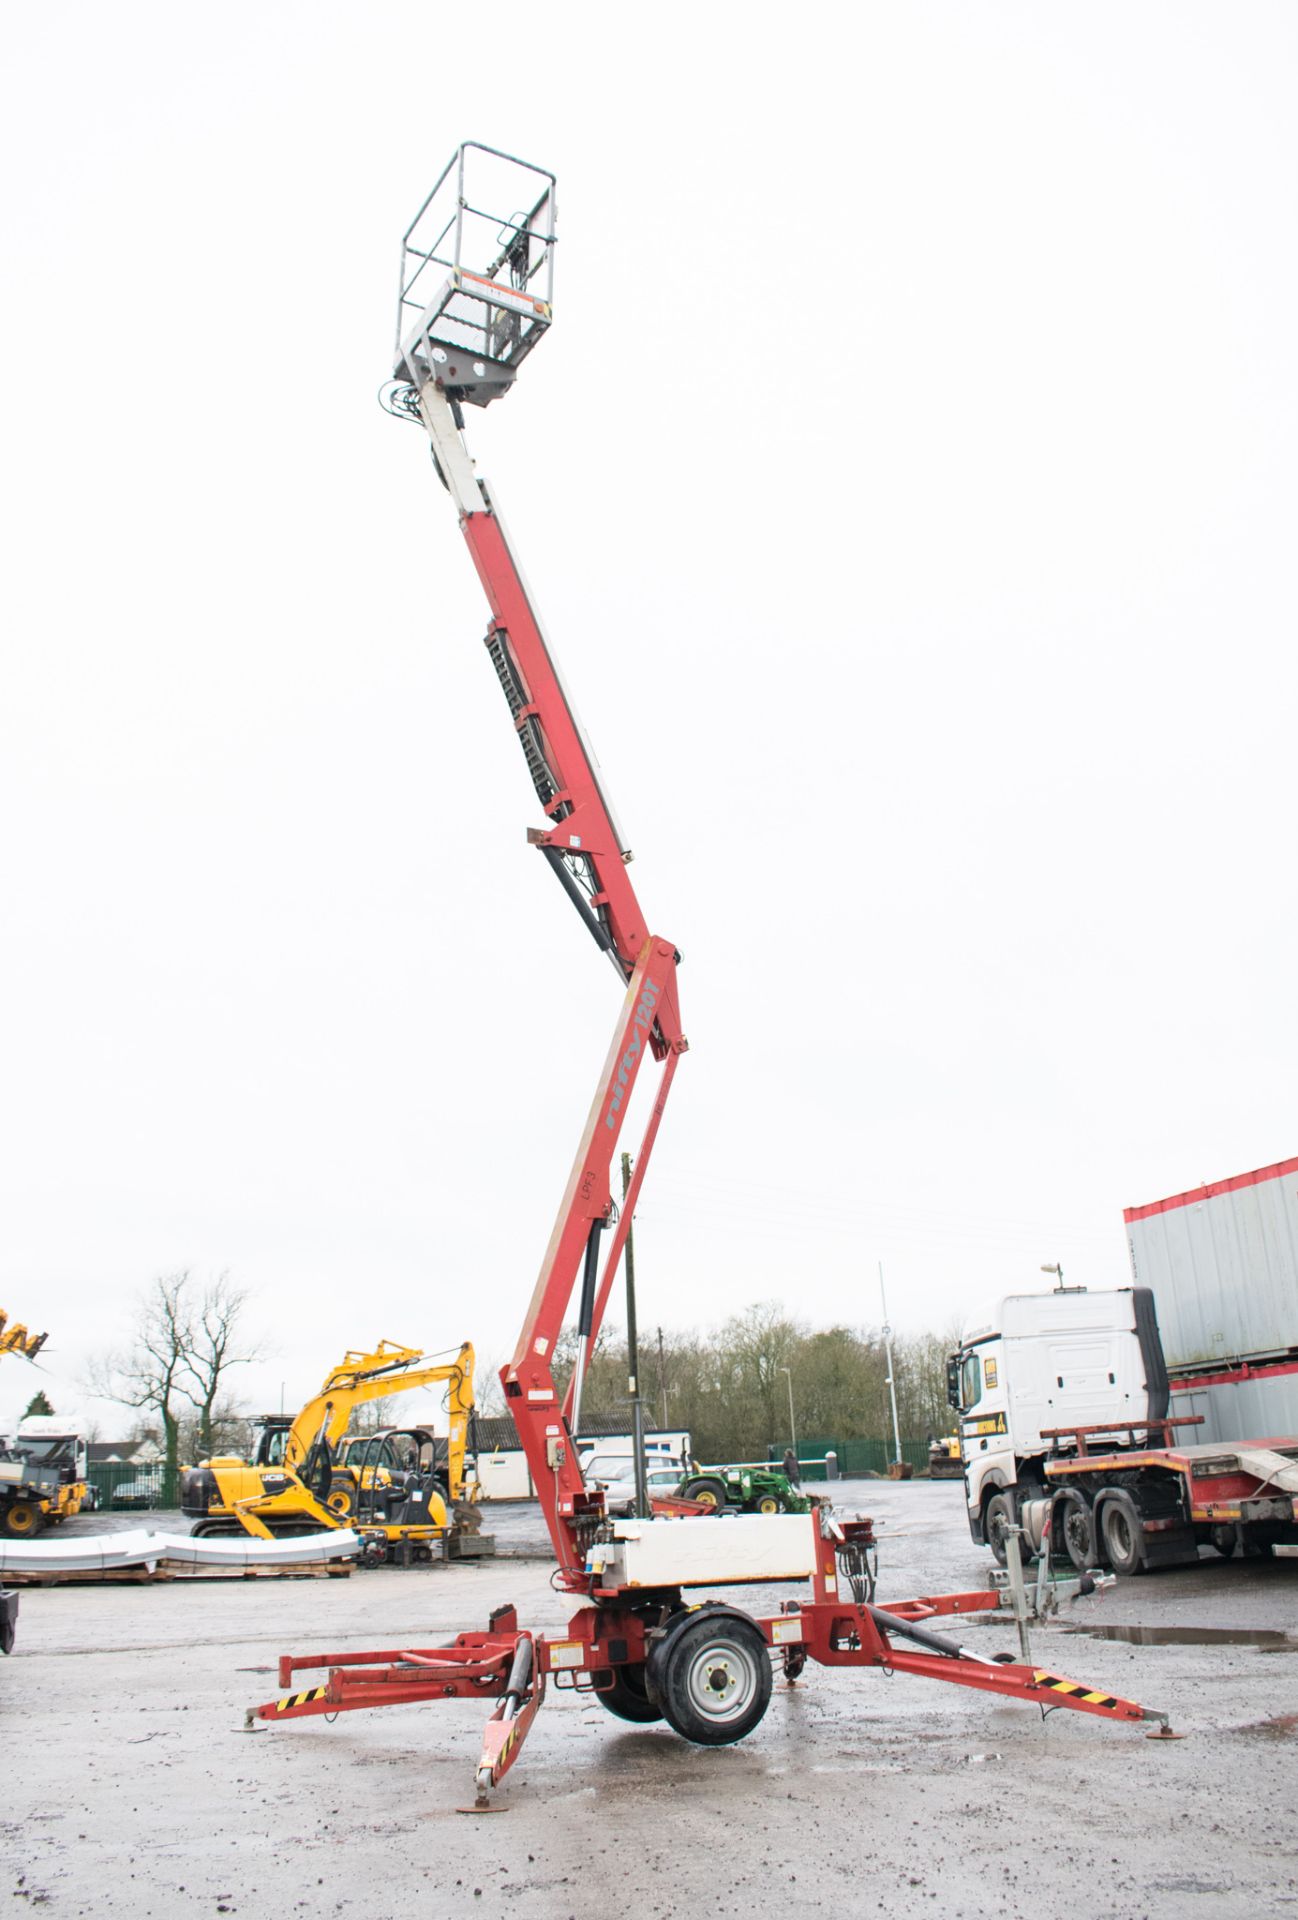 Nifty 120 TE fast tow articulated boom lift access platform Year: 2005 S/N: 0413653 WOOLPF3 - Image 7 of 9